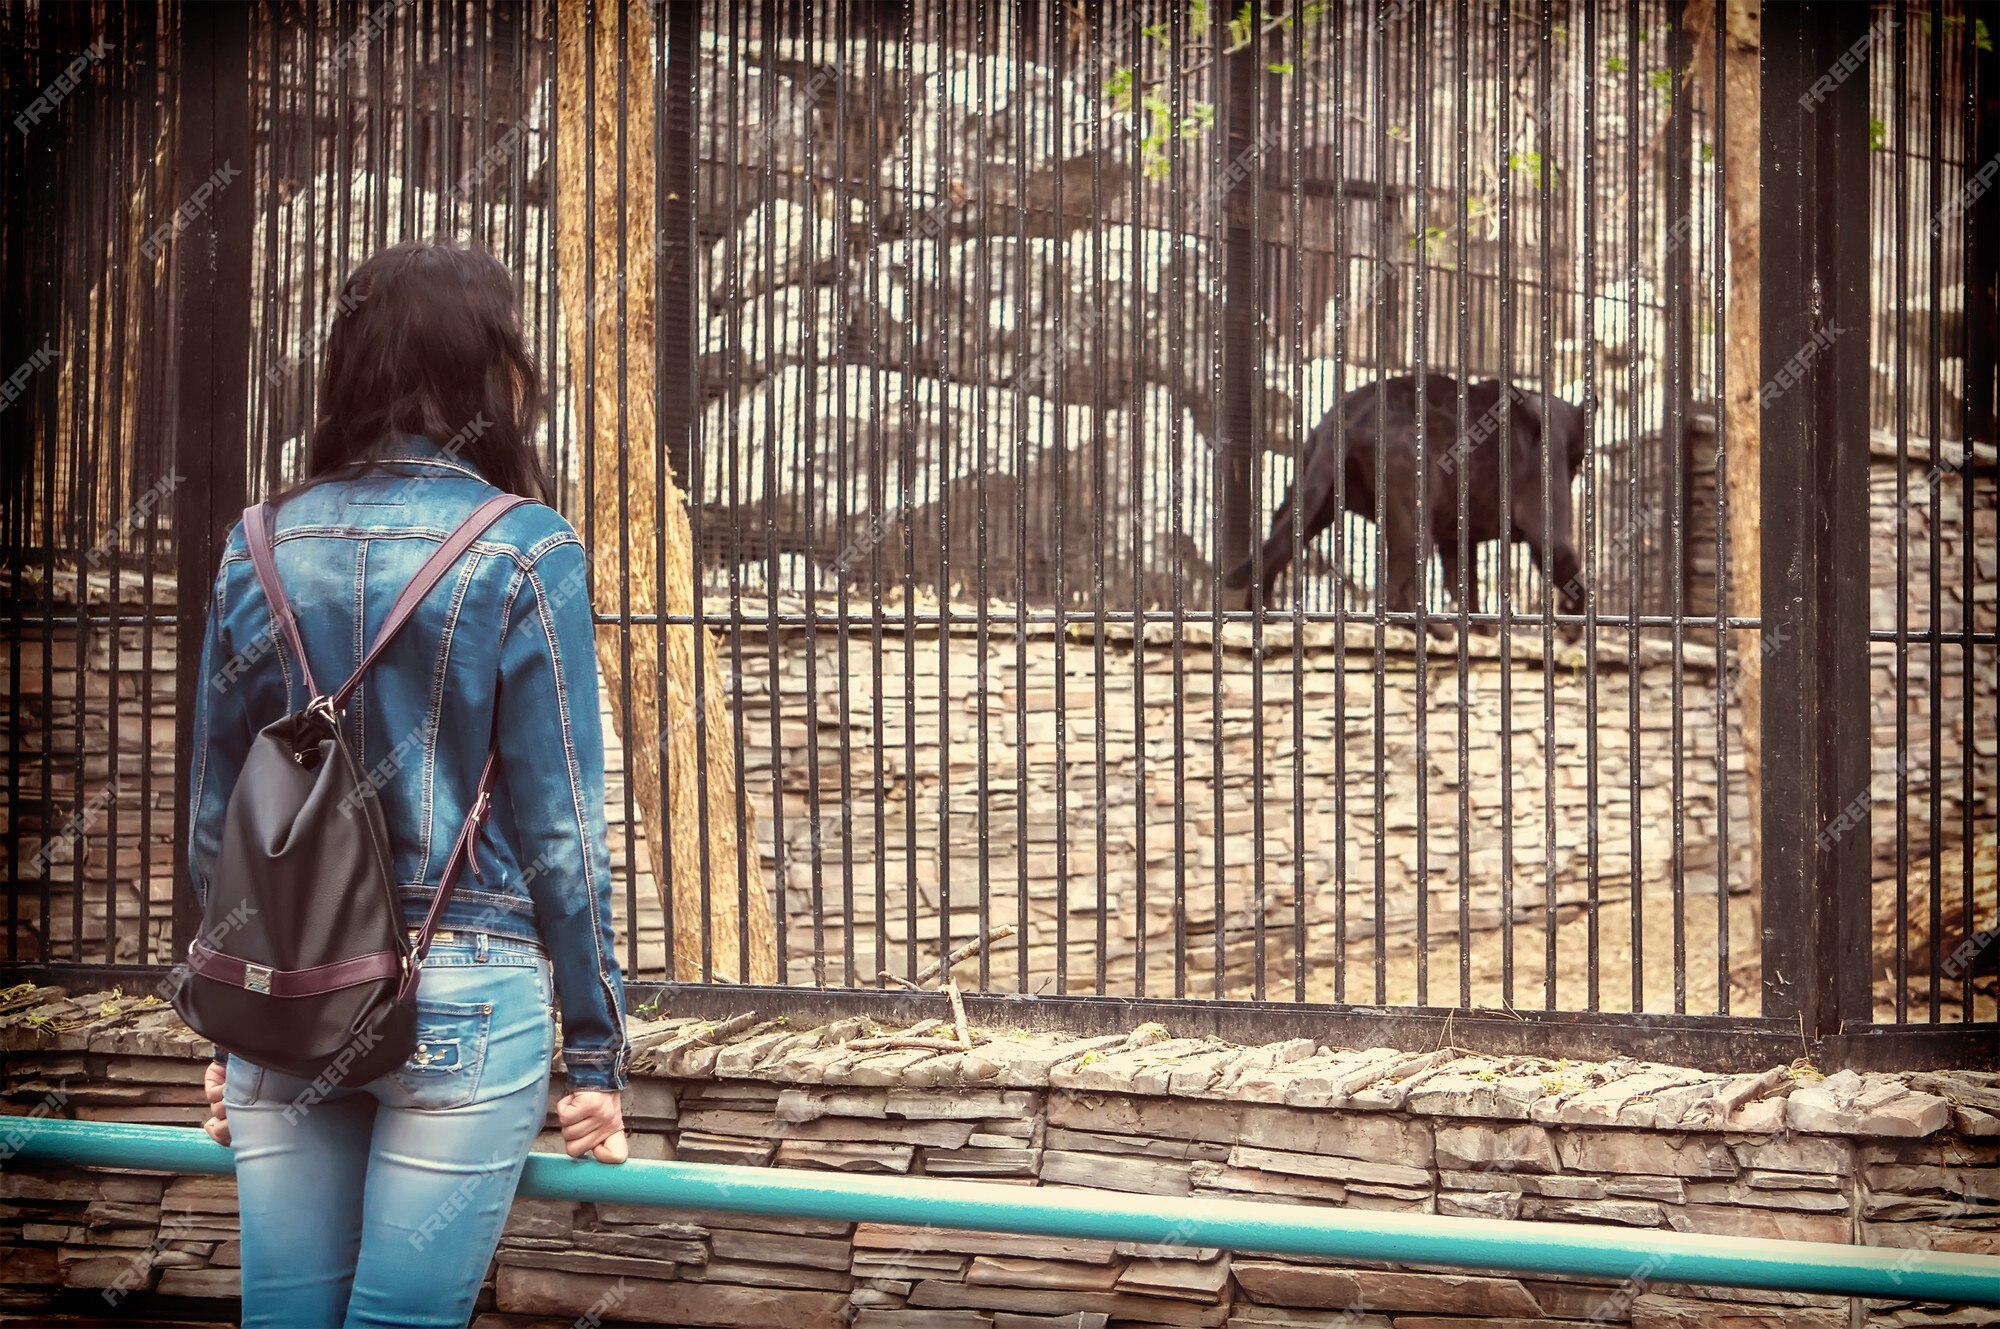 Premium Photo | The girl walks through the zoo and looking at animals in  cages. black jaguar in a cage.